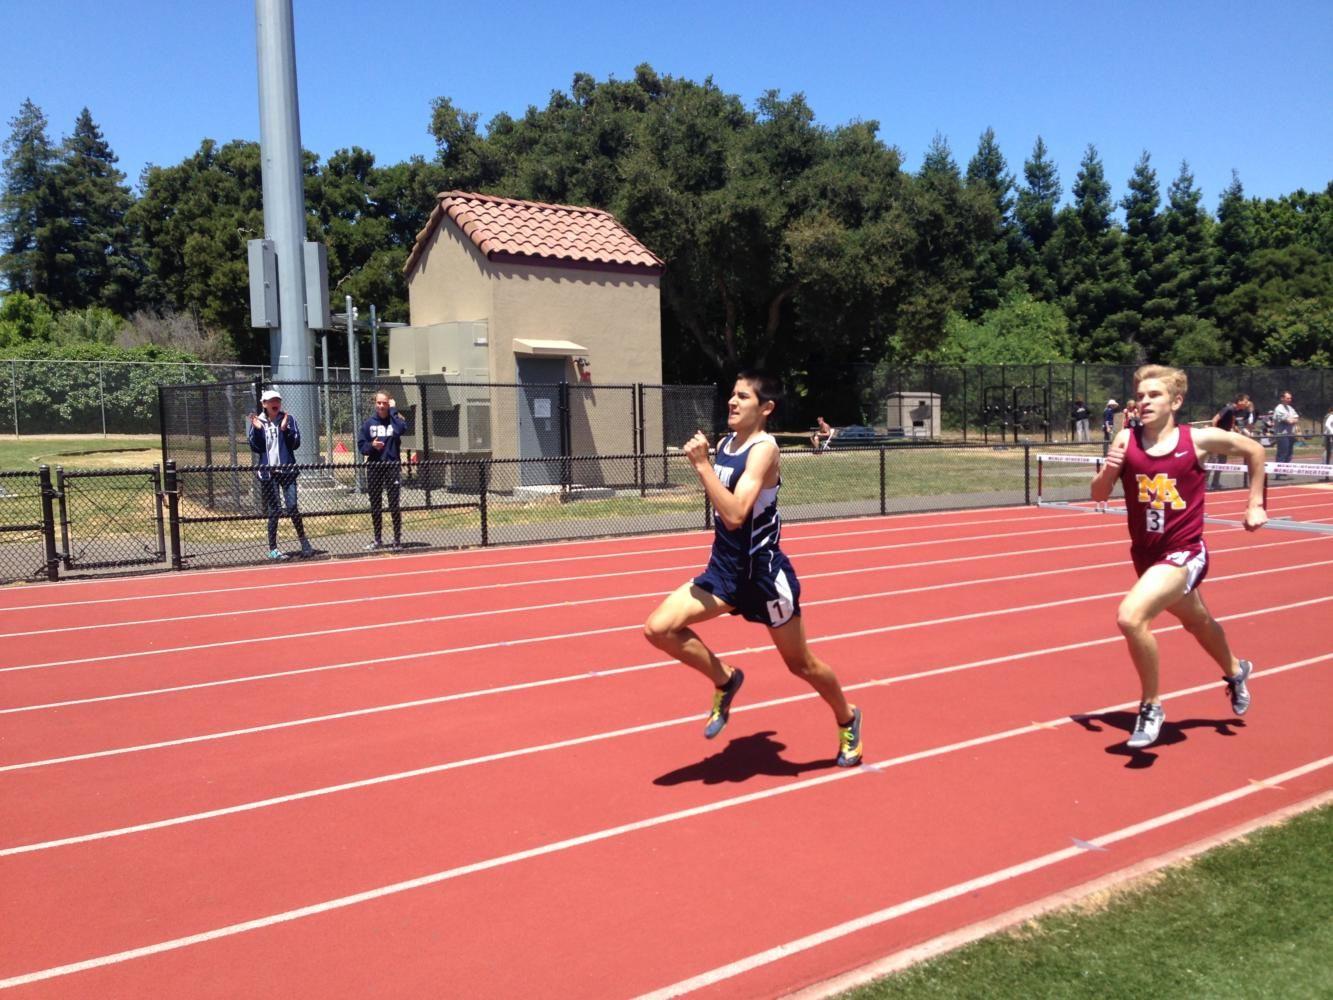 Ryan Wilson, a junior, sprints into first place during the 800m race.